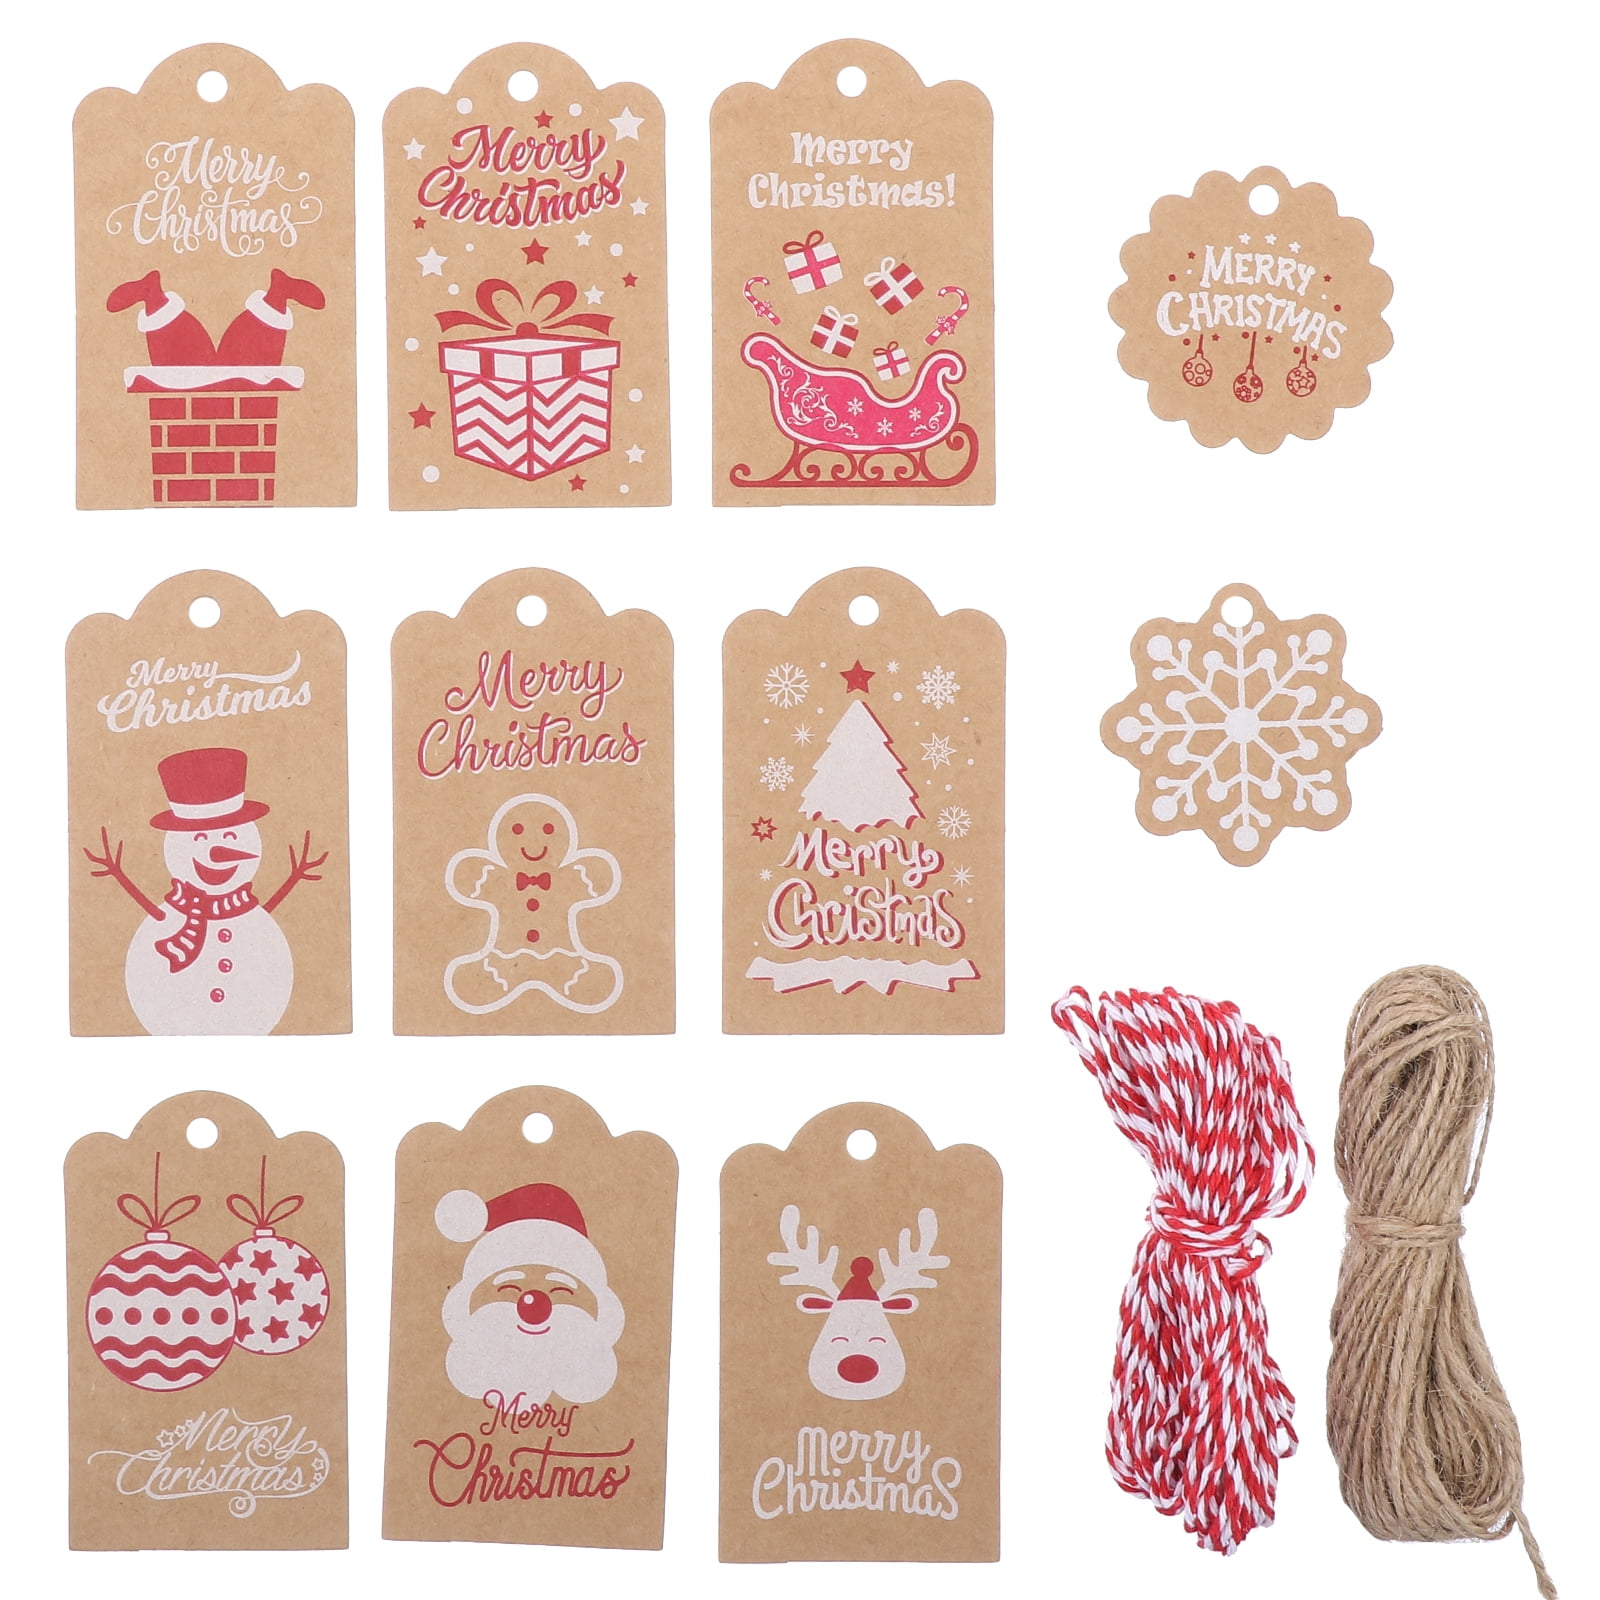 Amaza 100pcs Brown Paper Tags Kraft Christmas Gift Tags with Twine String Smooth for Writing DIY Merry Christmas Gift Xmas Tree Decorations 5 Patterns 